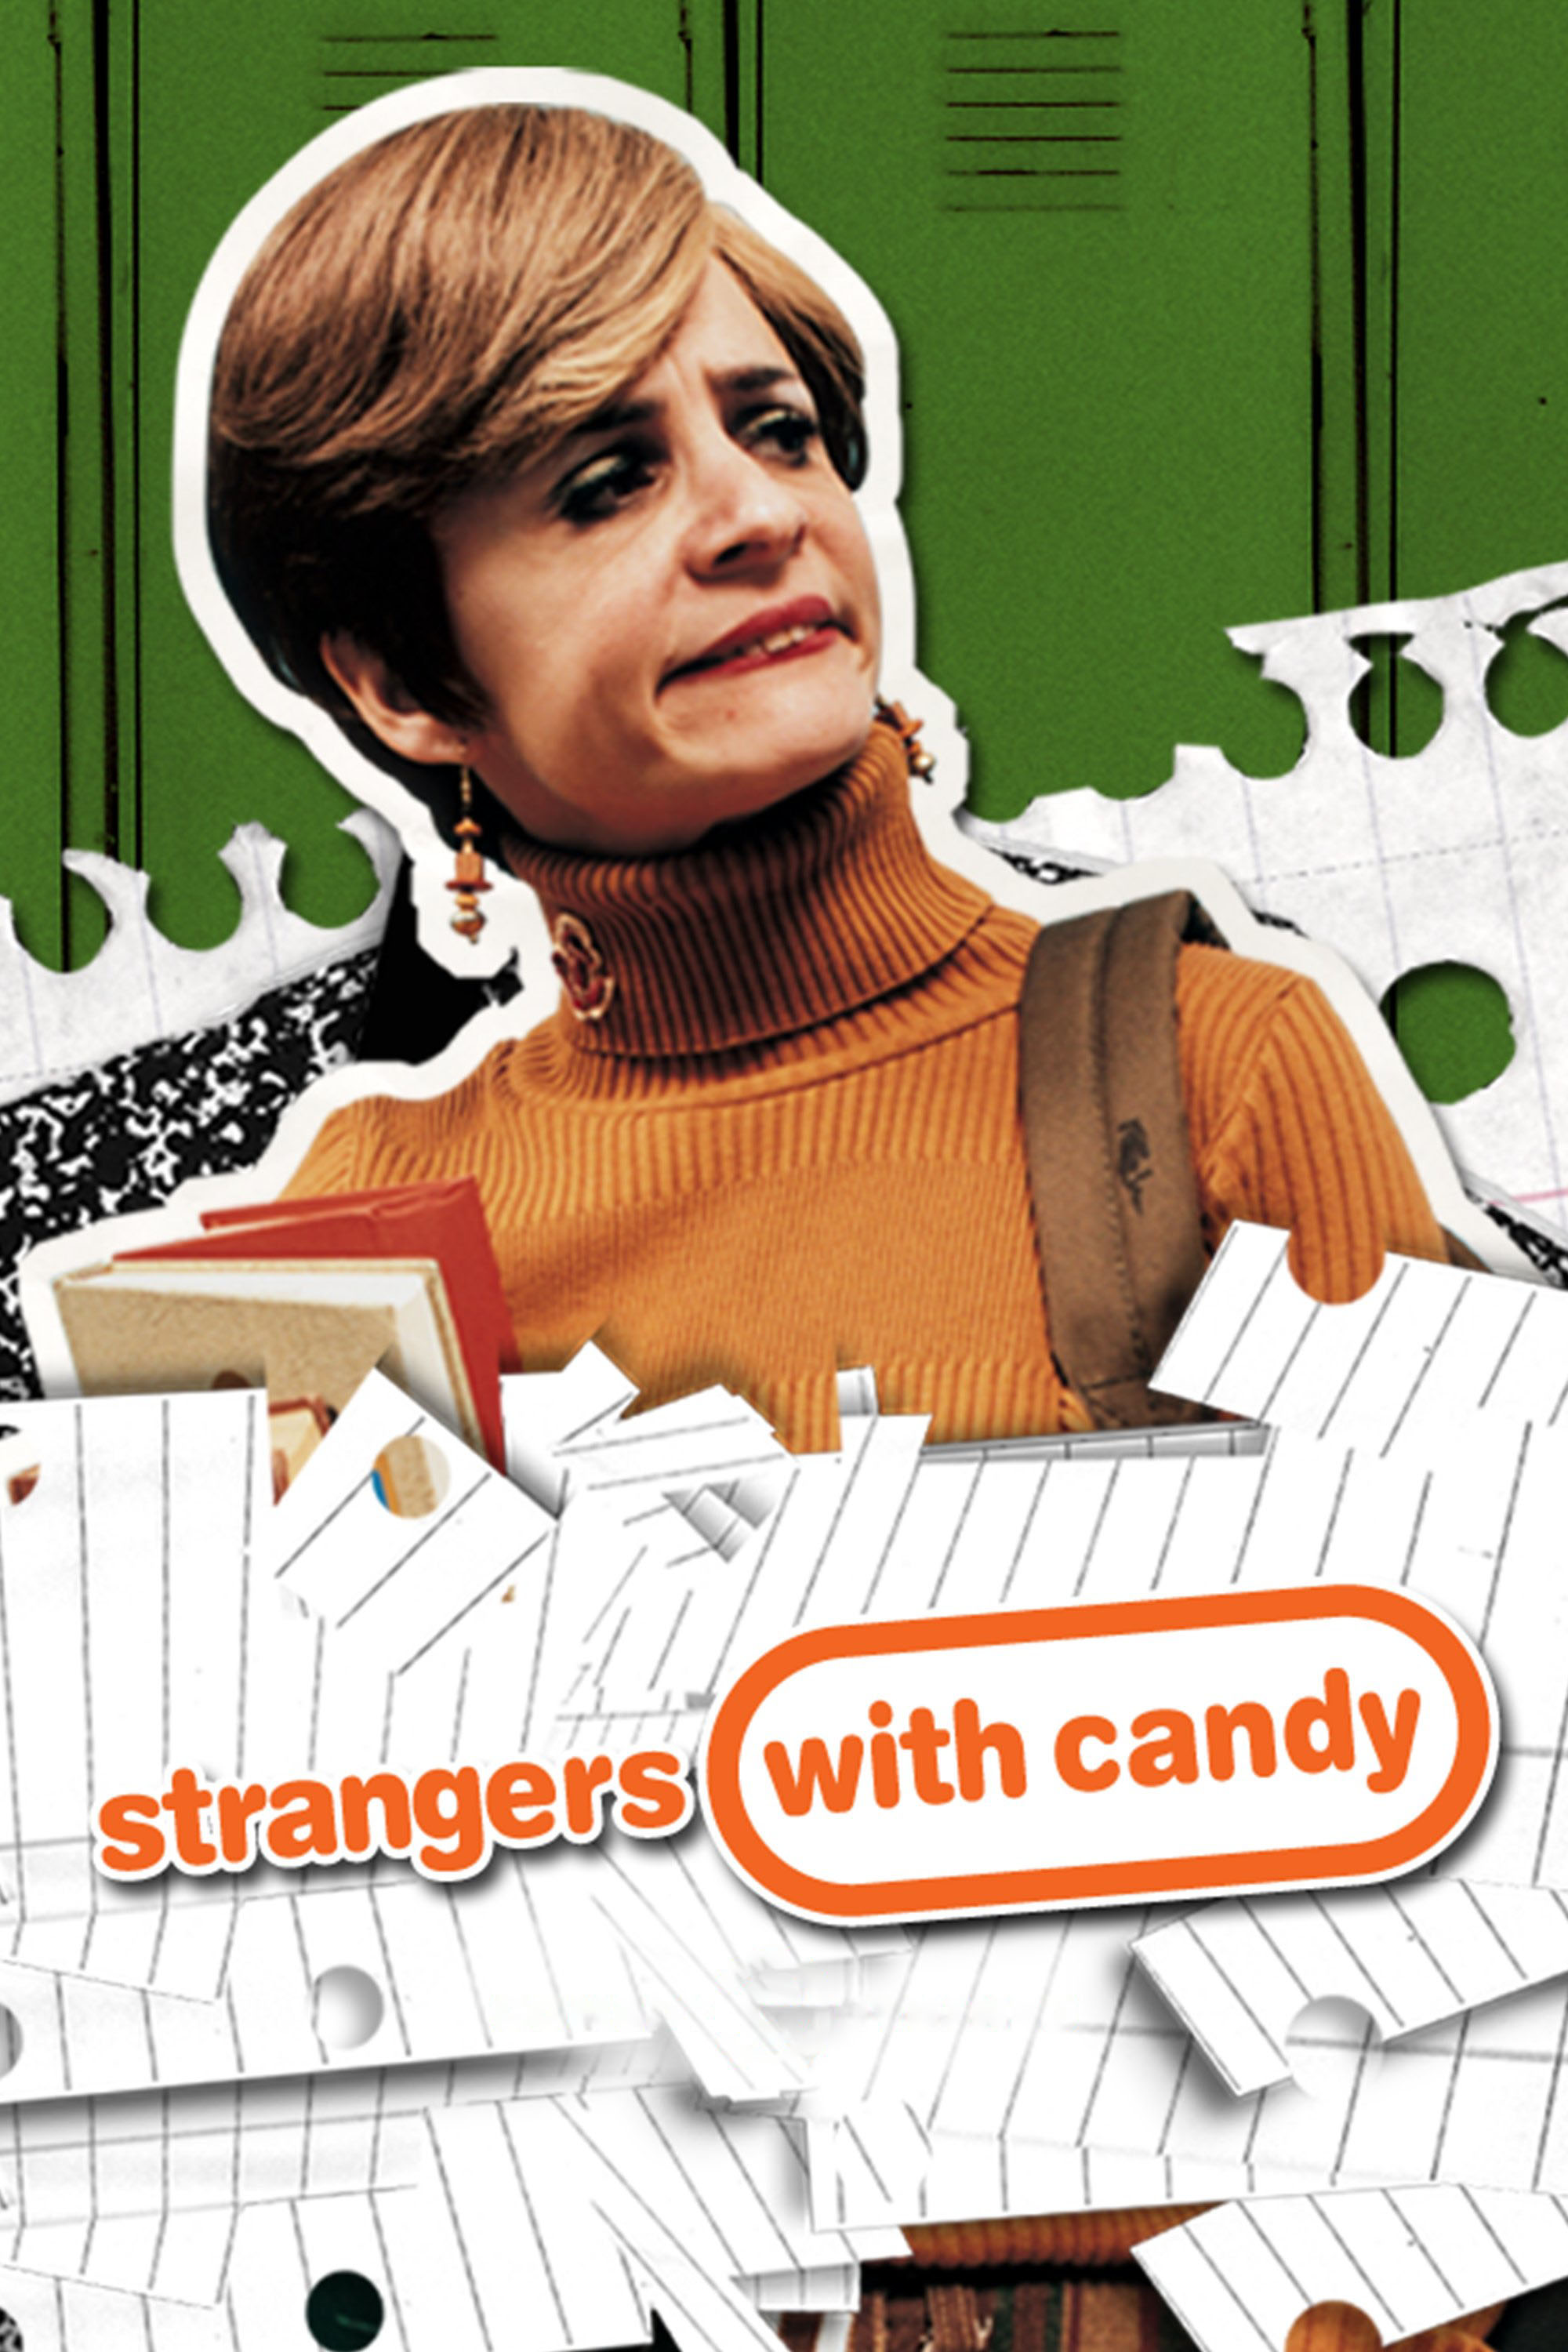 Watch Strangers With Candy Season 1